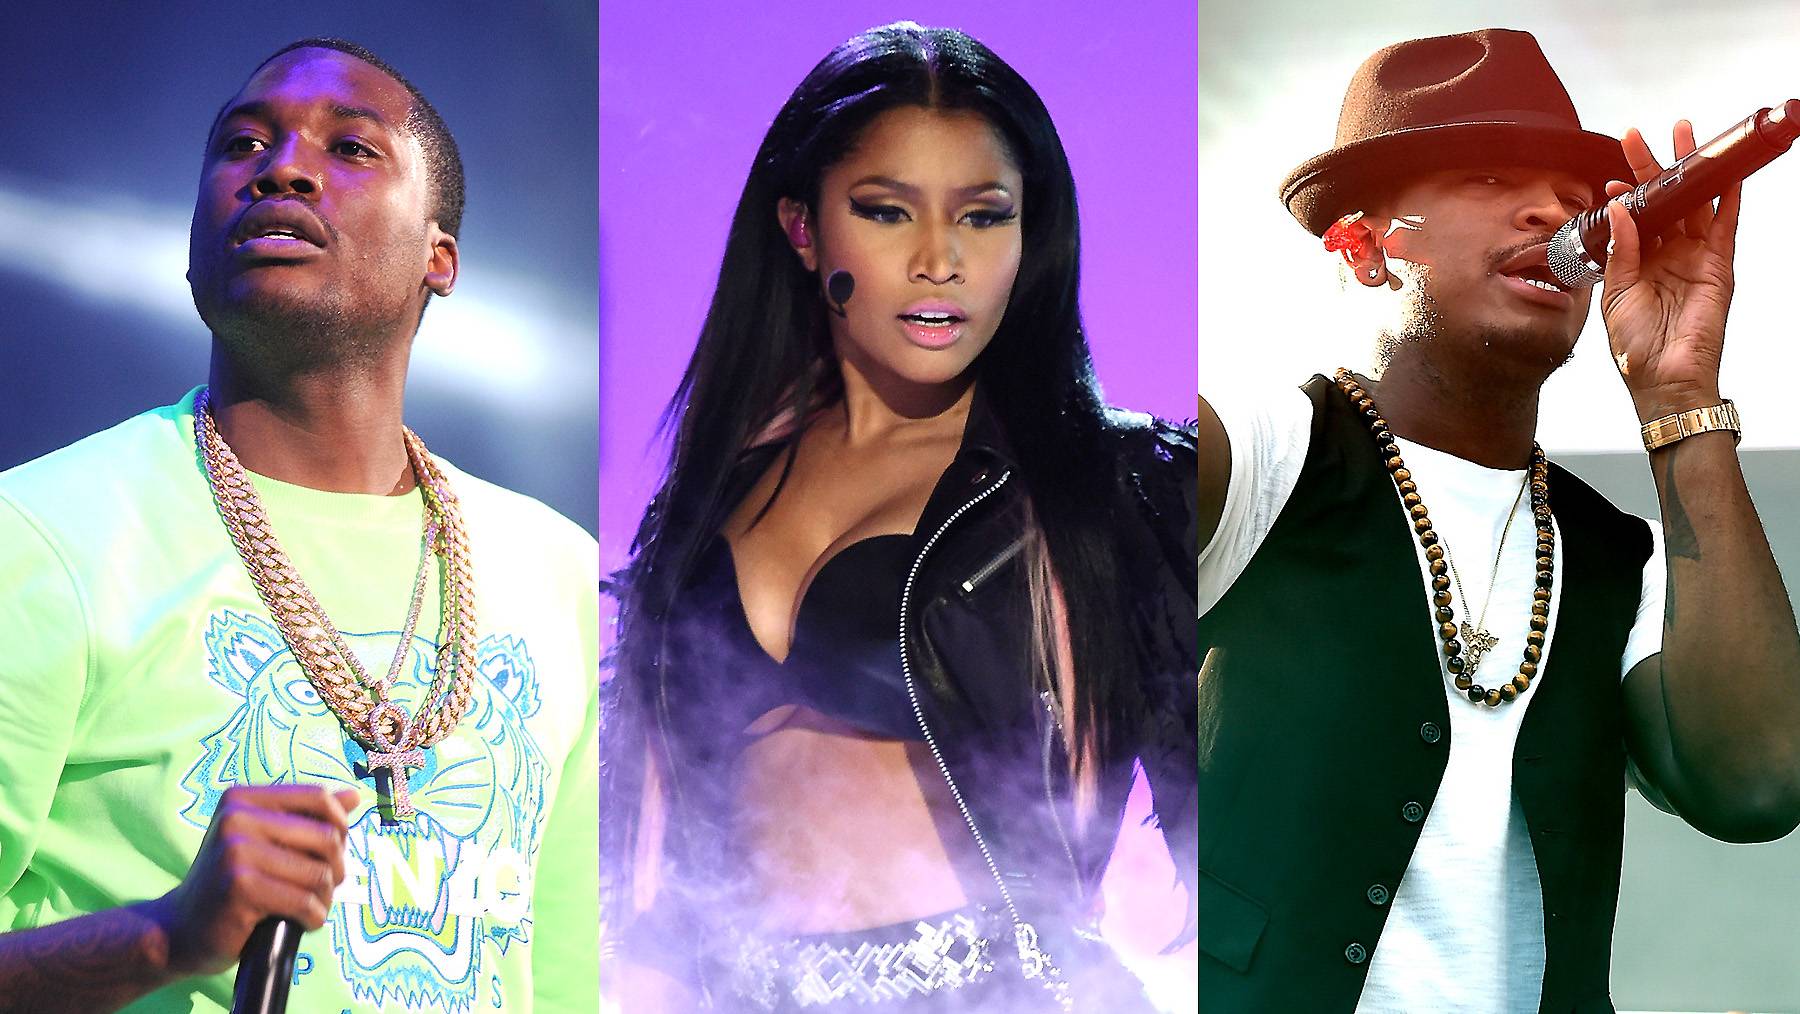 Taking the Stage  - Nicki Minaj, Meek Mill, Zendaya and more are coming to rock the stage in a big way for the 2015 BET Awards Sunday, June 28 8P/7C! (Photos from left: Brad Barket/Getty Images, Ethan Miller/Getty Images, Kevin Winter/Getty Images For 102.7 KIIS FM's Wango Tango)